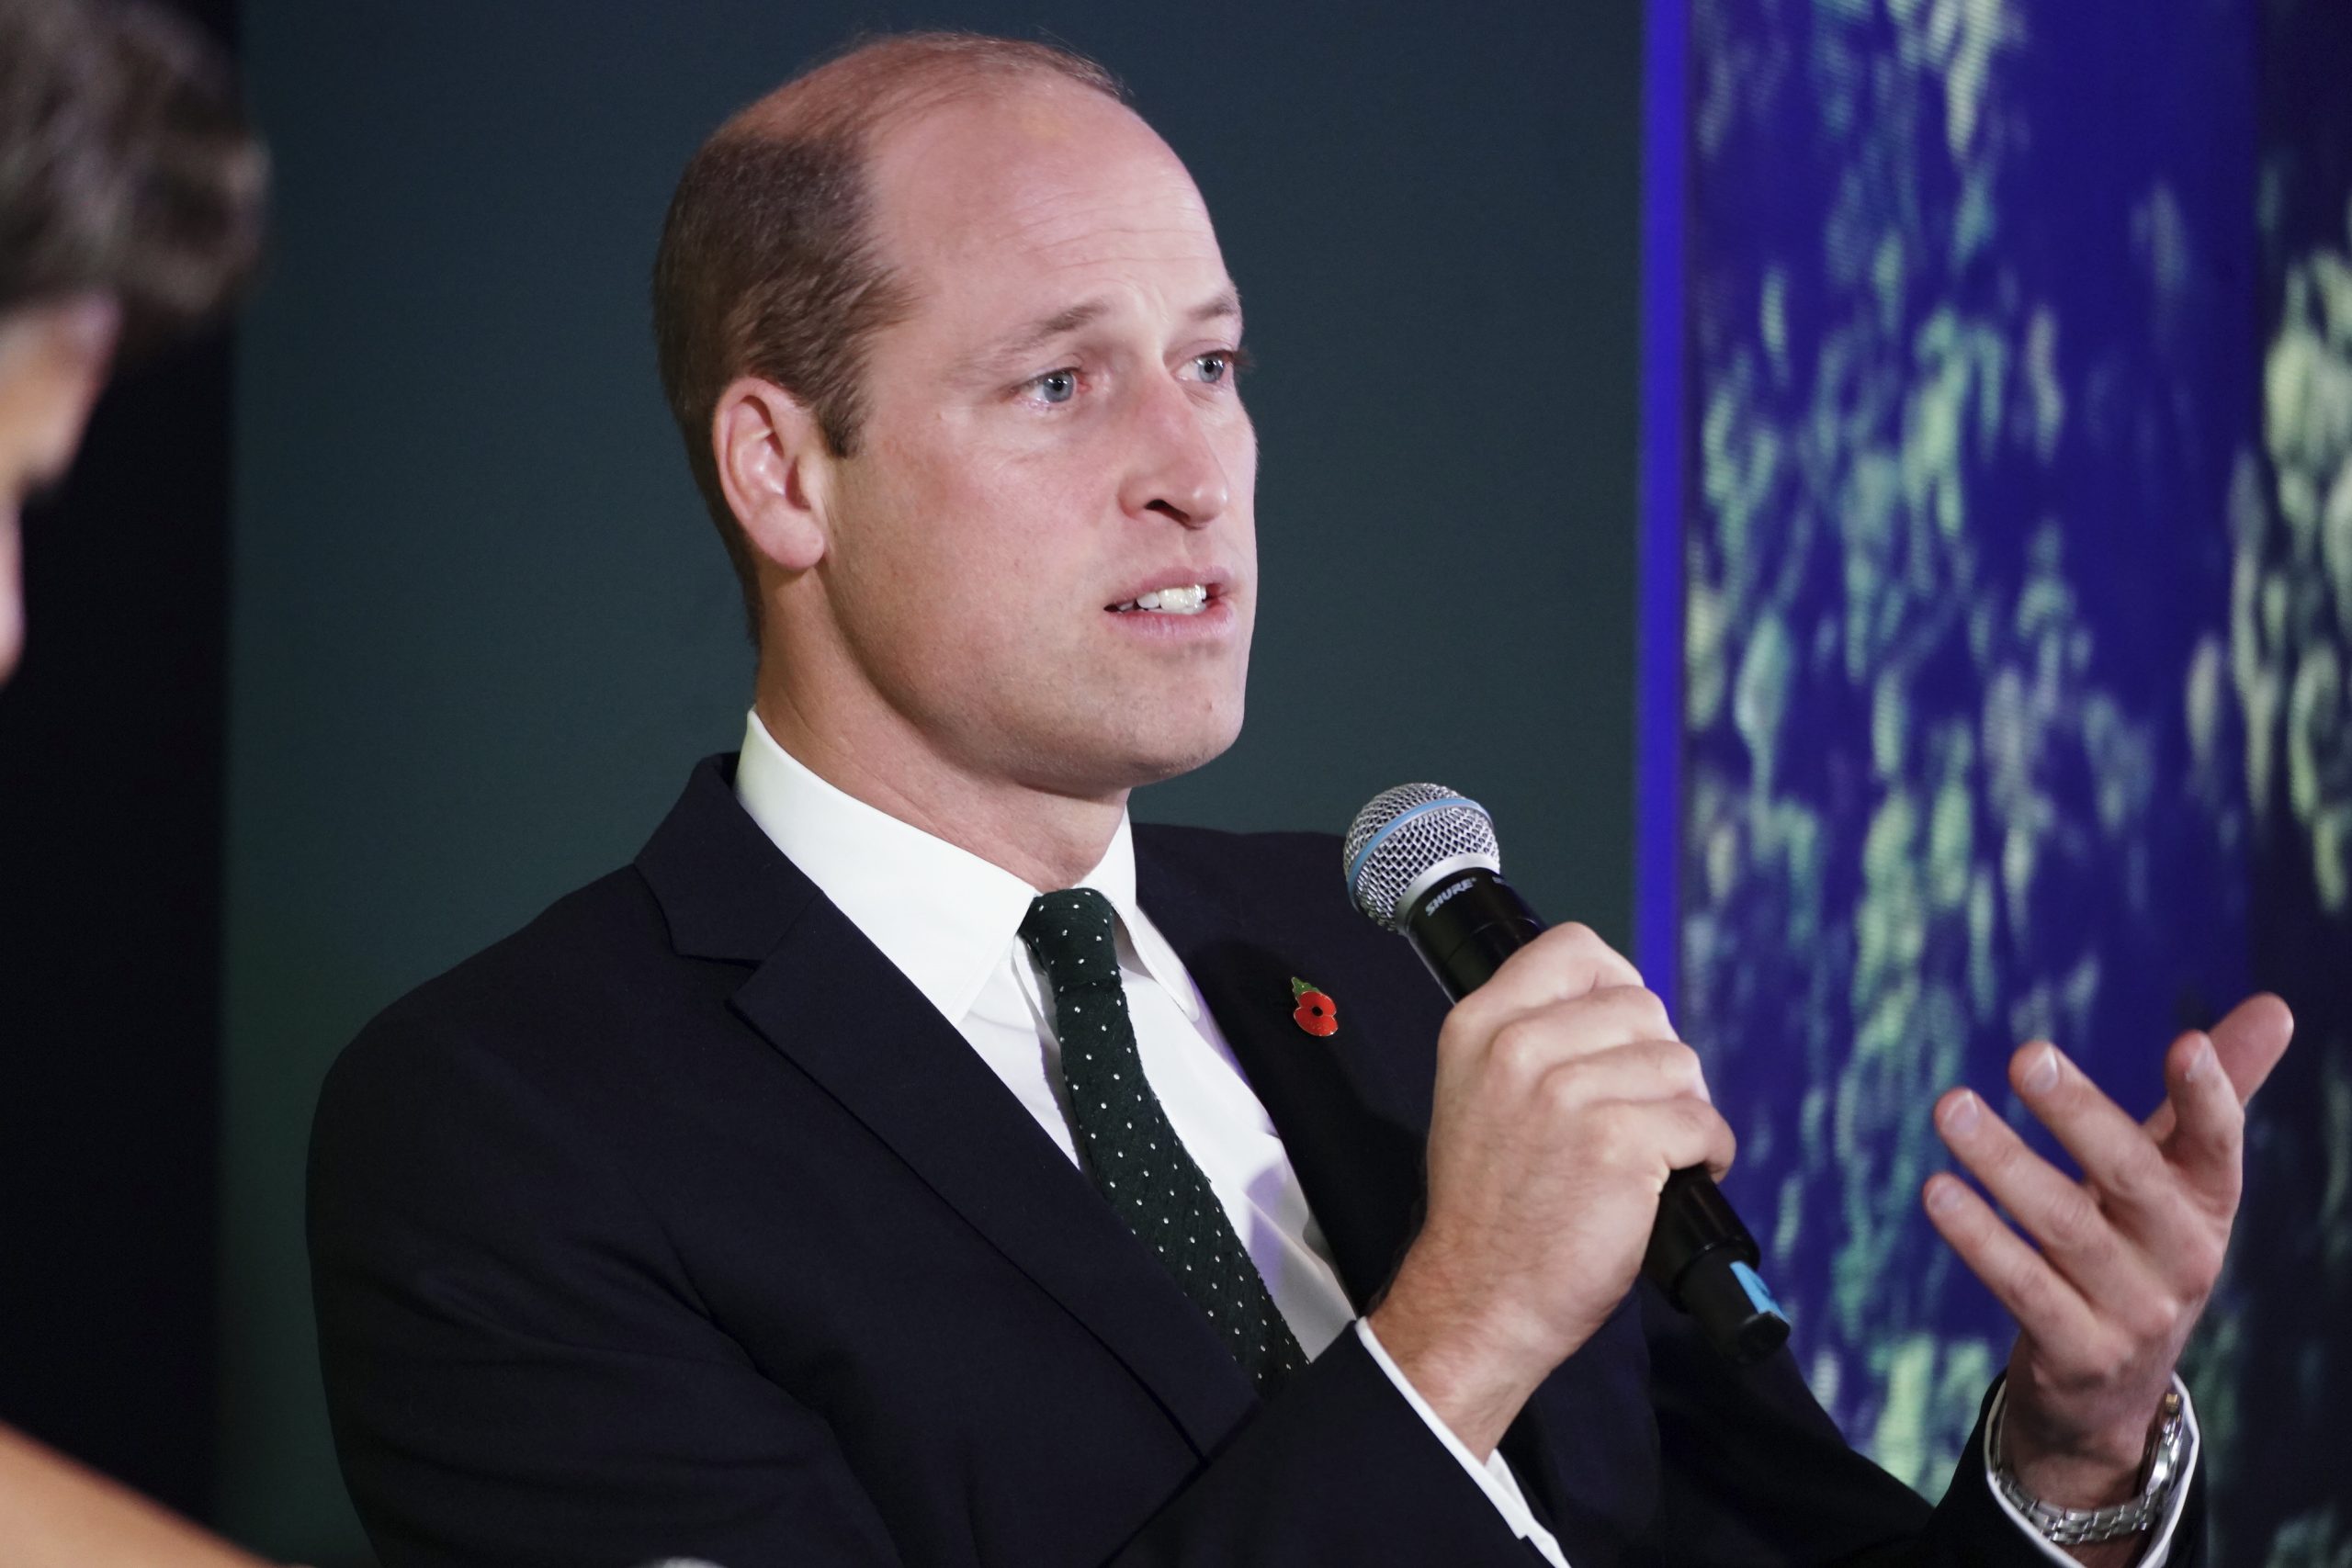 Prince William vows to go a ‘step further’ than his family and ‘bring real change’ in revealing interview